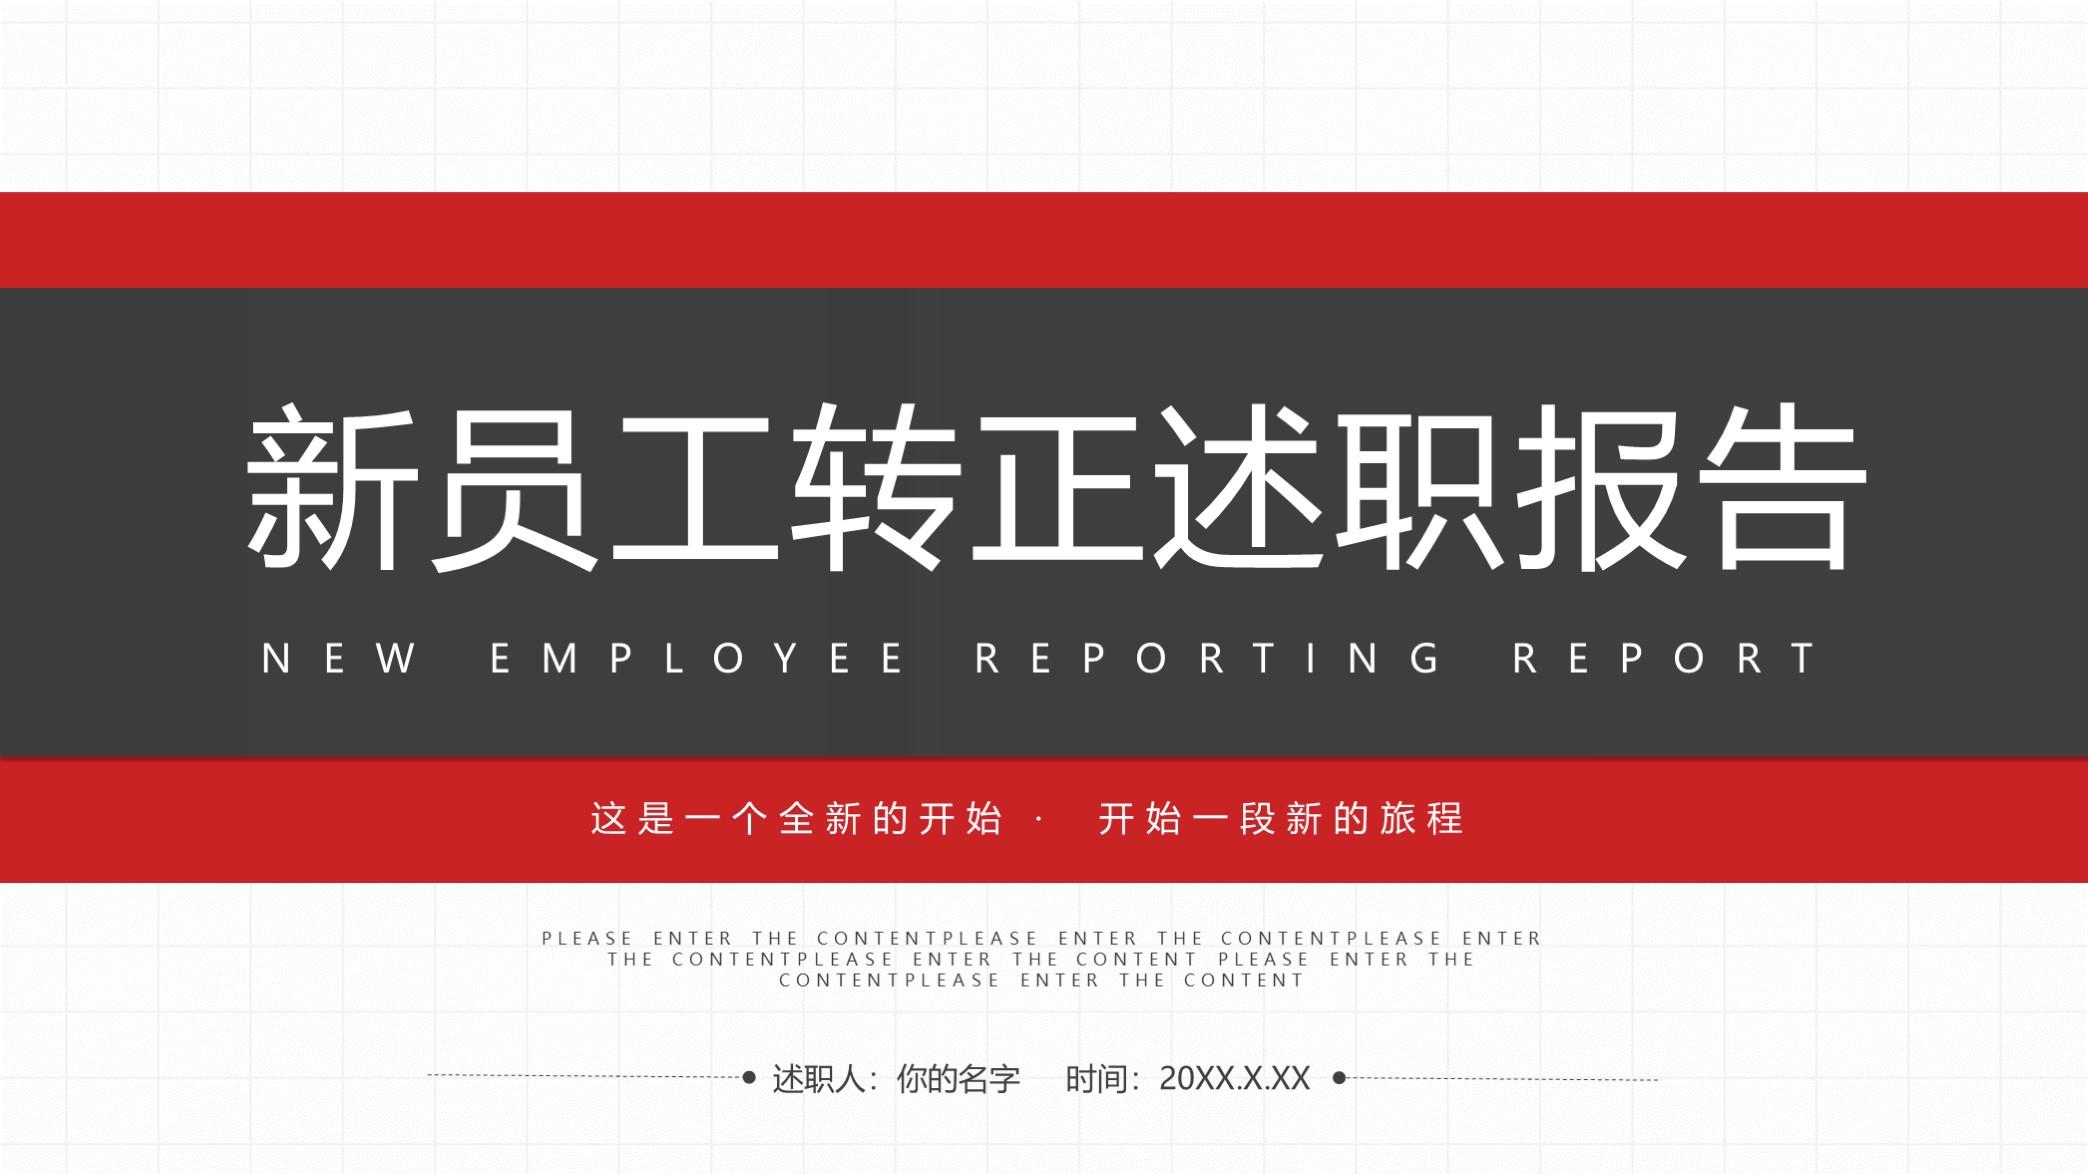 Issue No. 1415 - Simple red and black color matching report PPT template for new employees